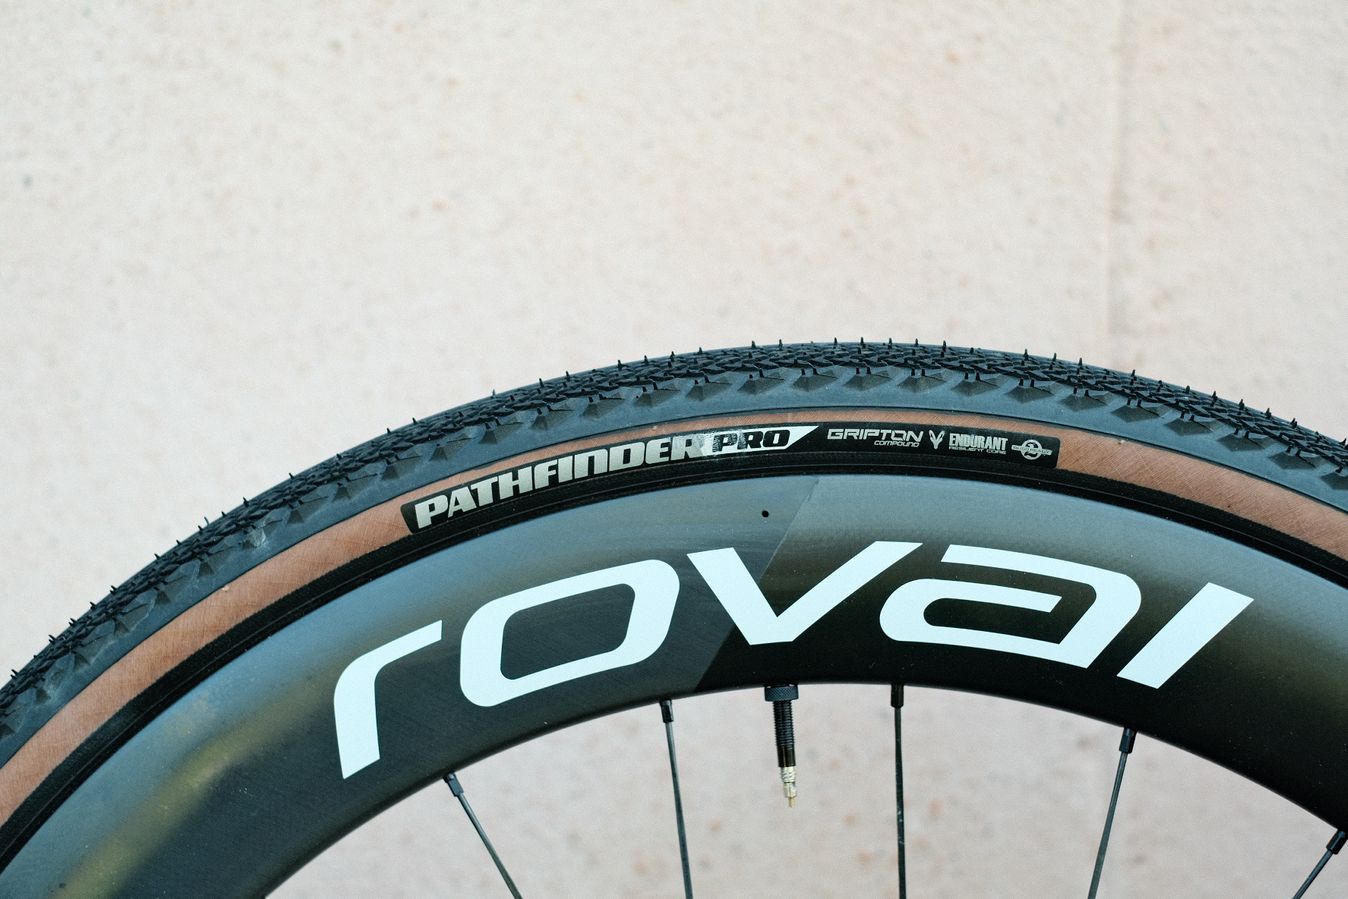 38mm to 40mm-wide tyres were a popular choice at the Gravel World Championships